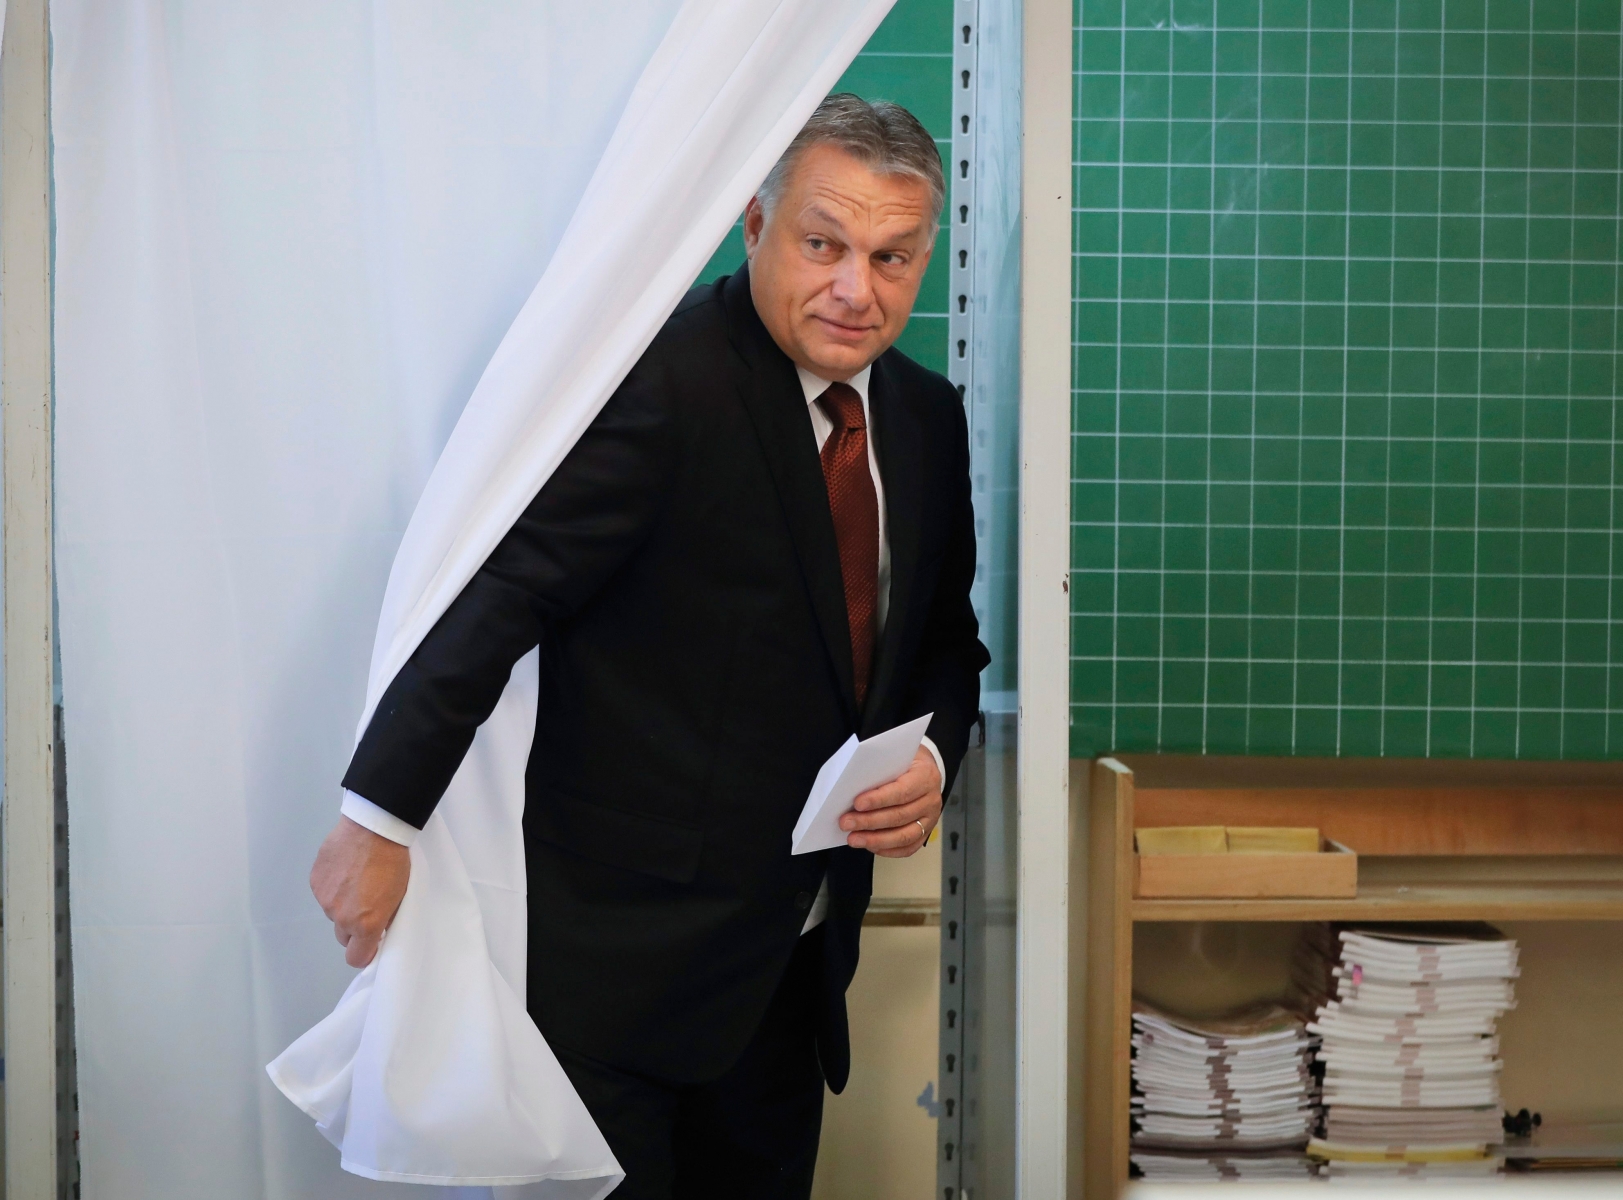 Hungarian Prime Minister Viktor Orban exits a voting cabin after voting in the referendum in Budapest, Hungary, Sunday, Oct. 2, 2016. Hungarians vote in a referendum which Orban hopes will give his government the popular support it seeks to oppose any future plans by the European Union to resettle asylum seekers among its member states. (AP Photo/Vadim Ghirda) Hungary Referendum